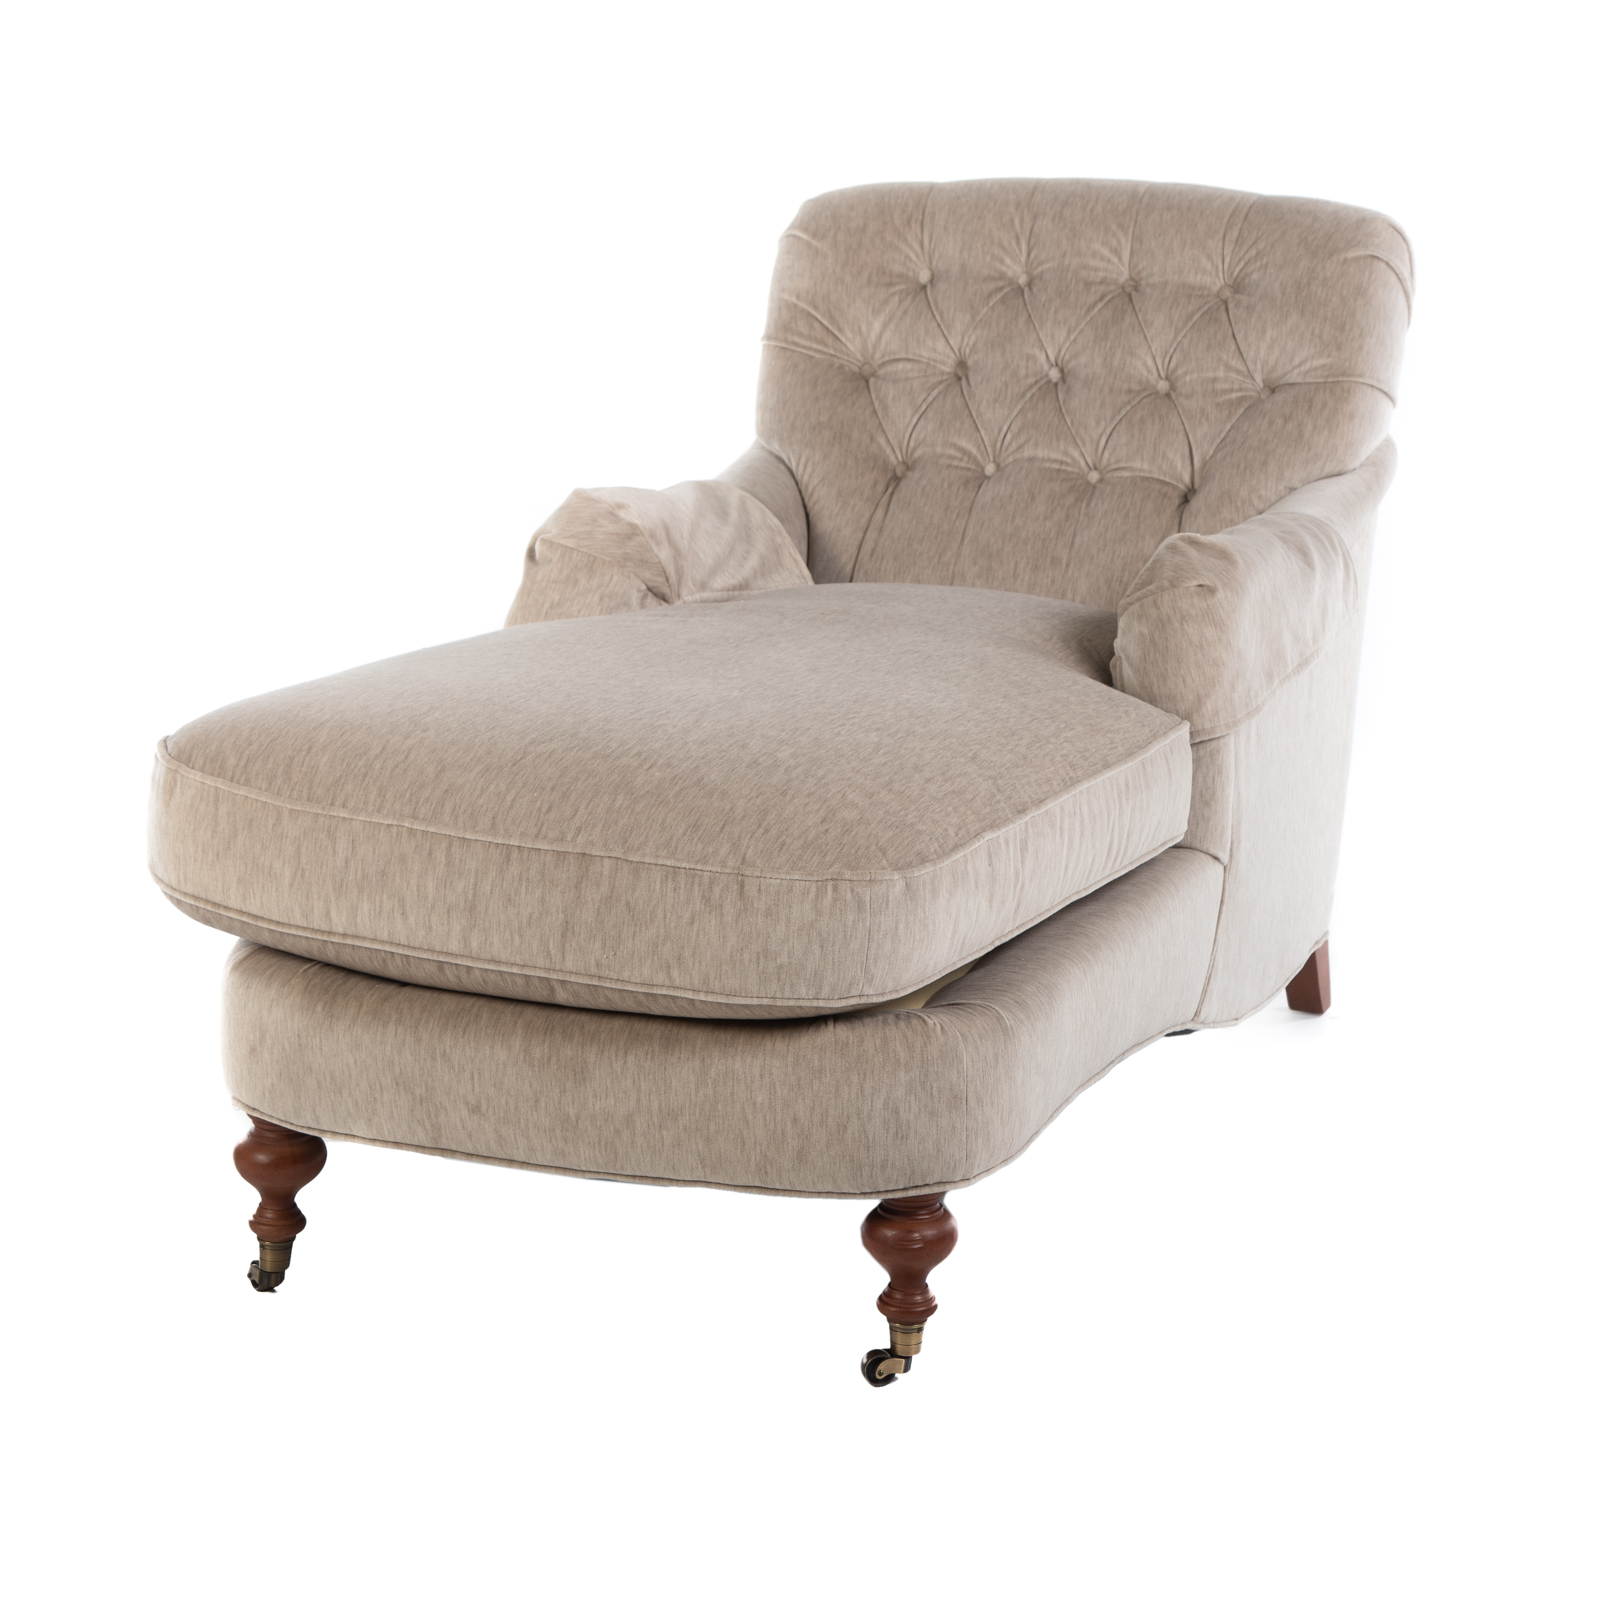 CONTEMPORARY UPHOLSTERED CHAISE 2875bb